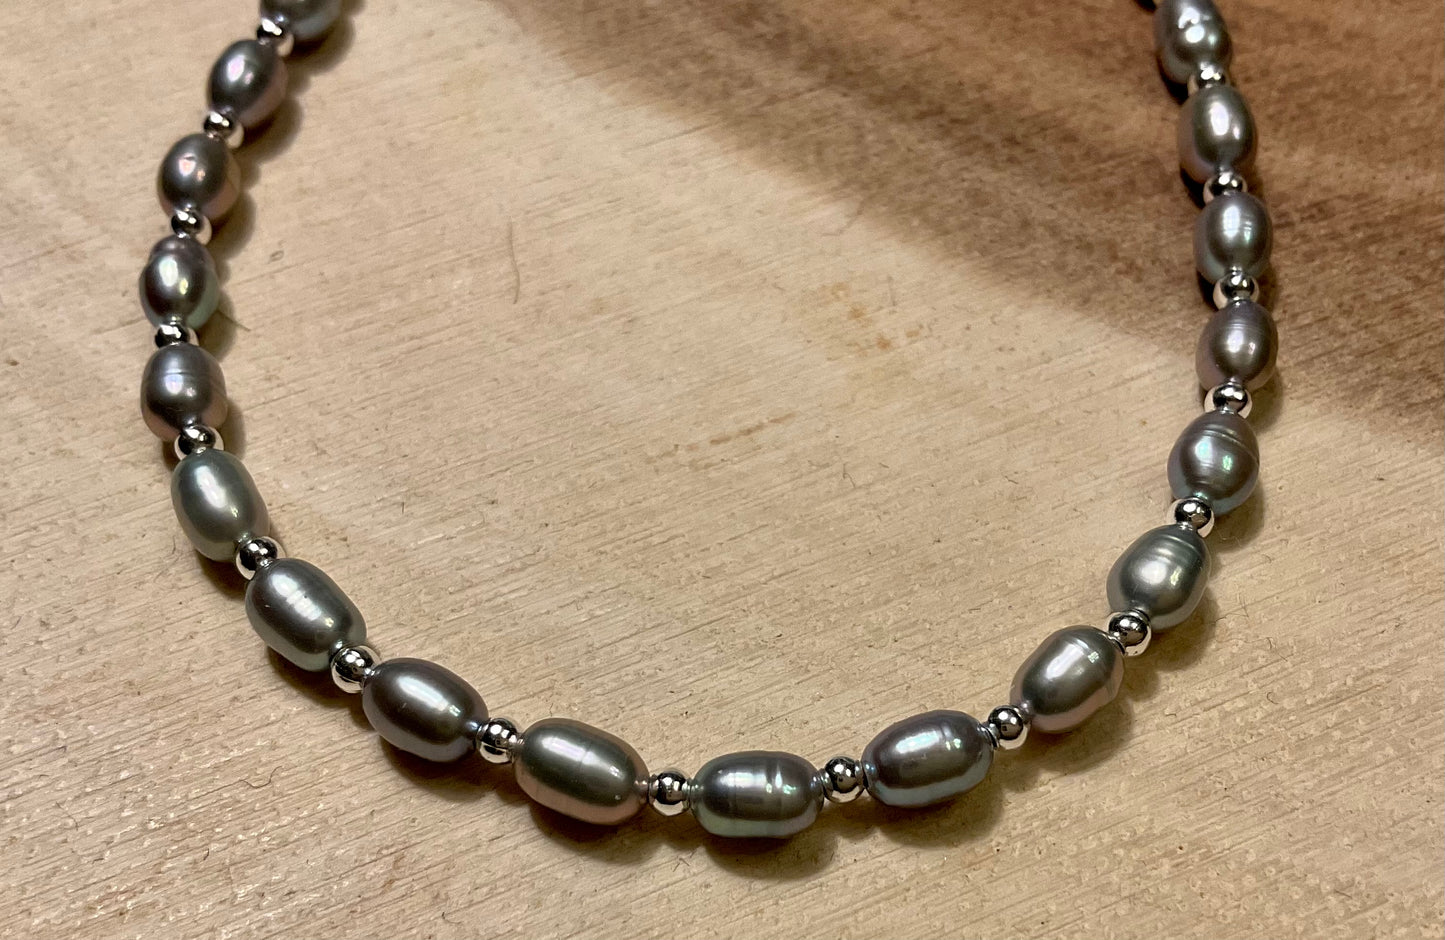 Silver/Blue Pearl Necklace with Sterling Silver Beads